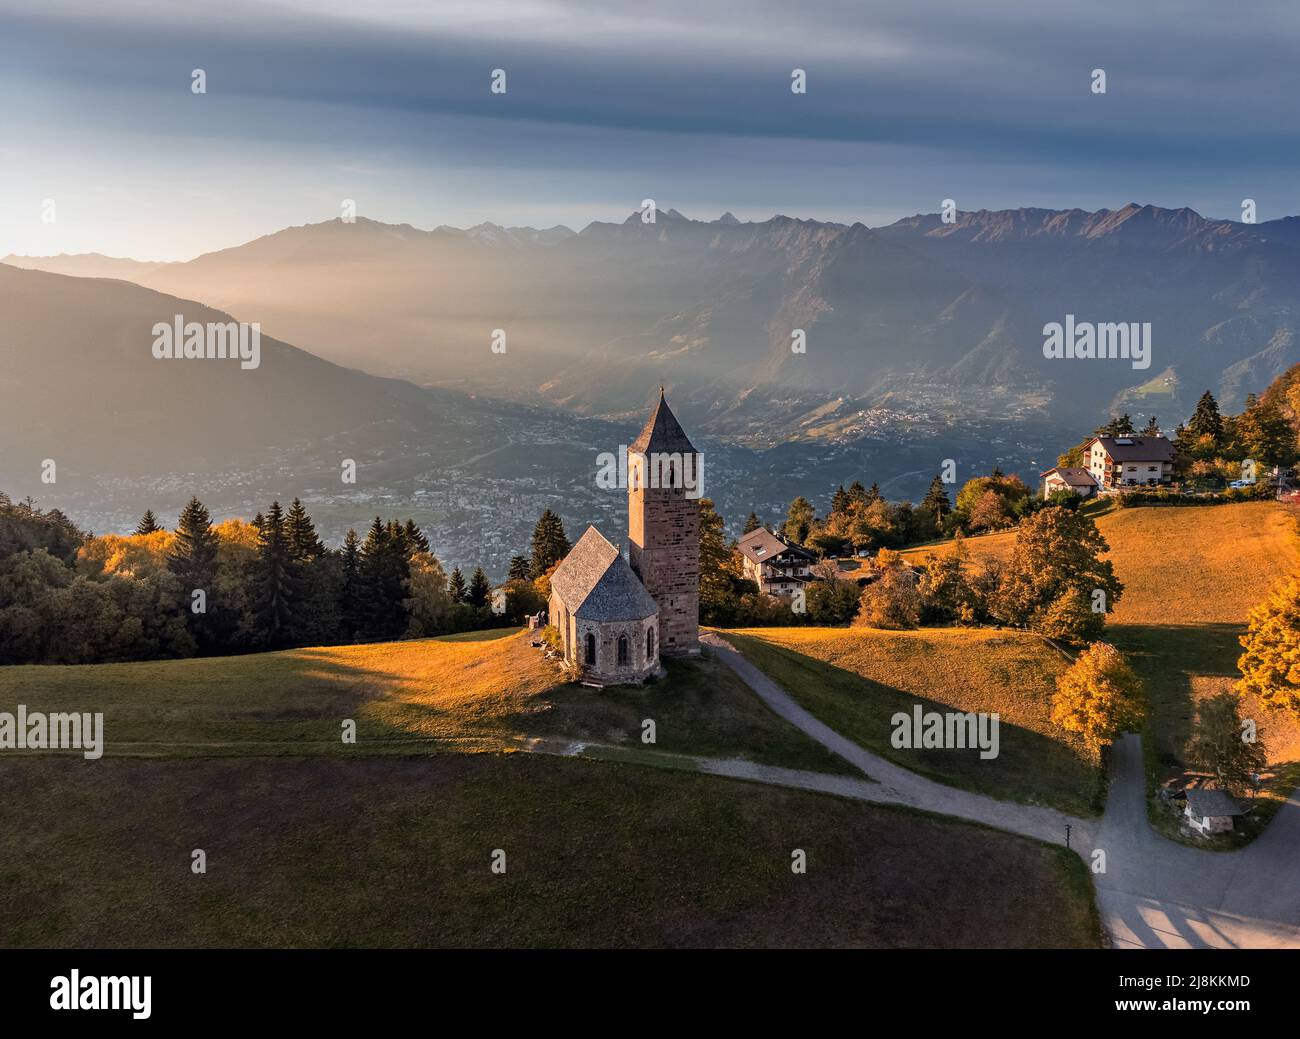 Hafling, Italy - Aerial view of the mountain church of St. Catherine (Chiesa di Santa Caterina) near Hafling - Avelengo on a warm autumn sunset with t Stock Photo